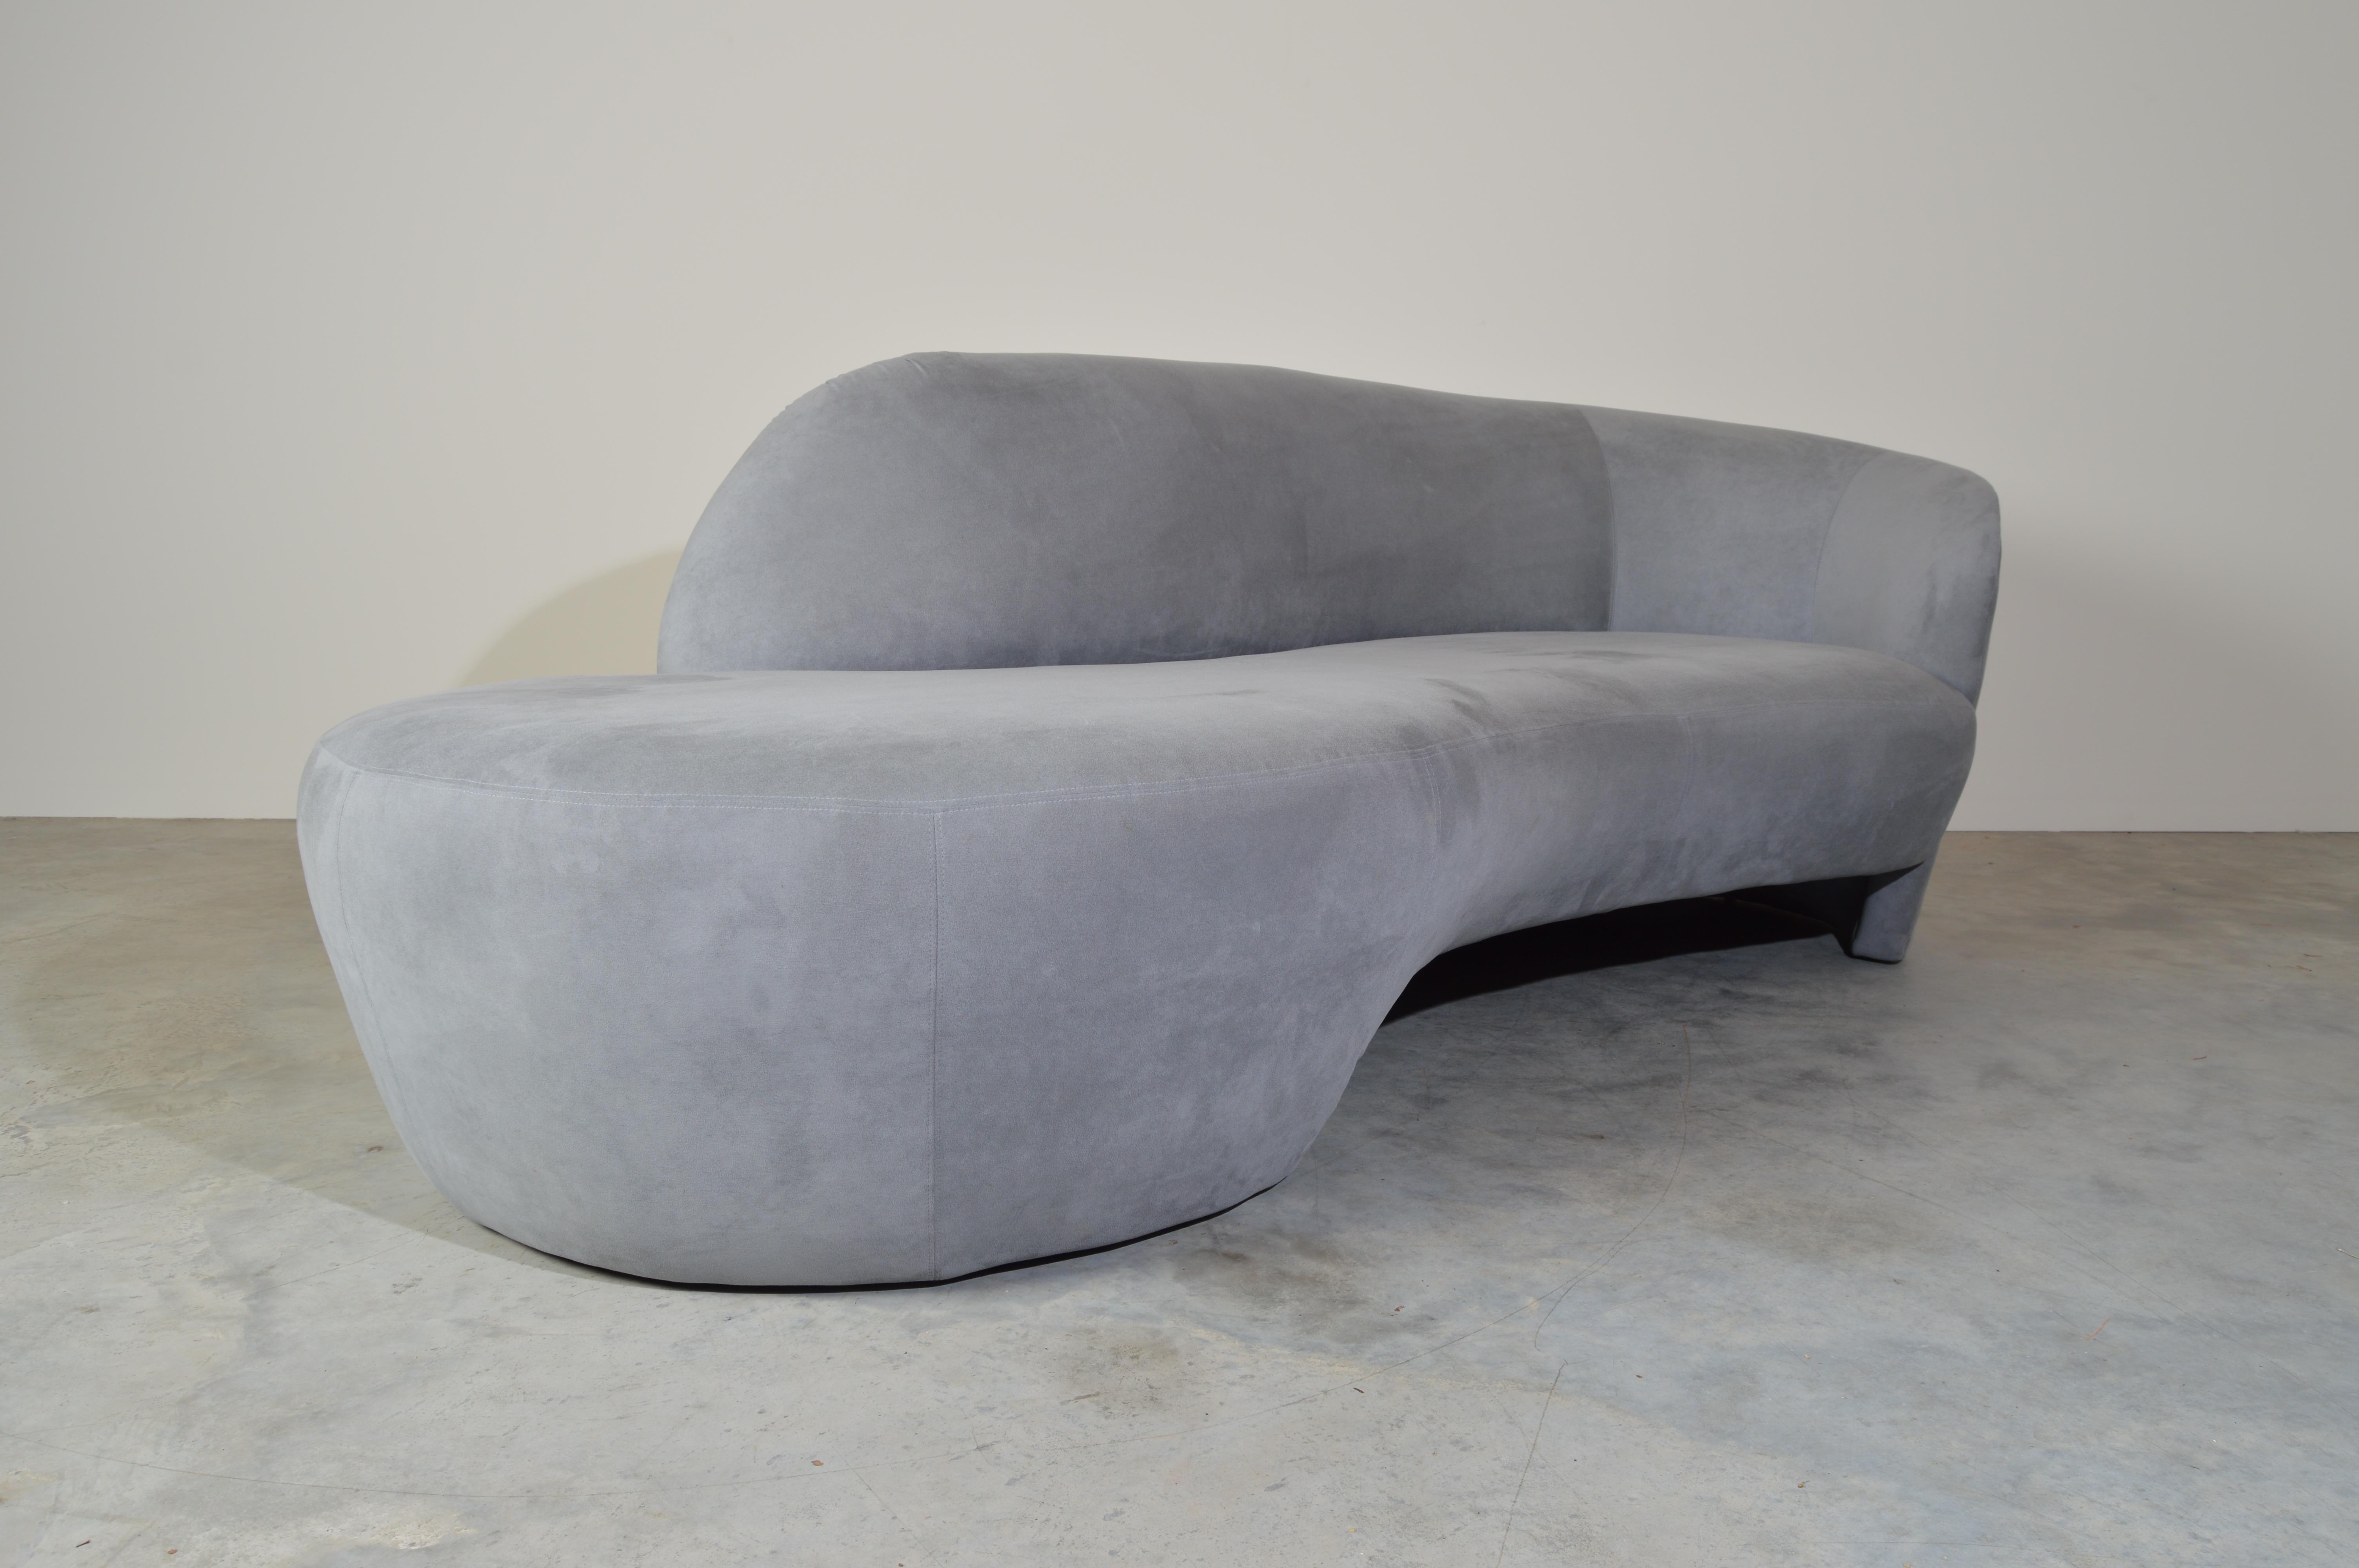 American Weiman Preview Sofa Chaise Lounge with Pouf Ottoman in Ultrasuede after Kagan